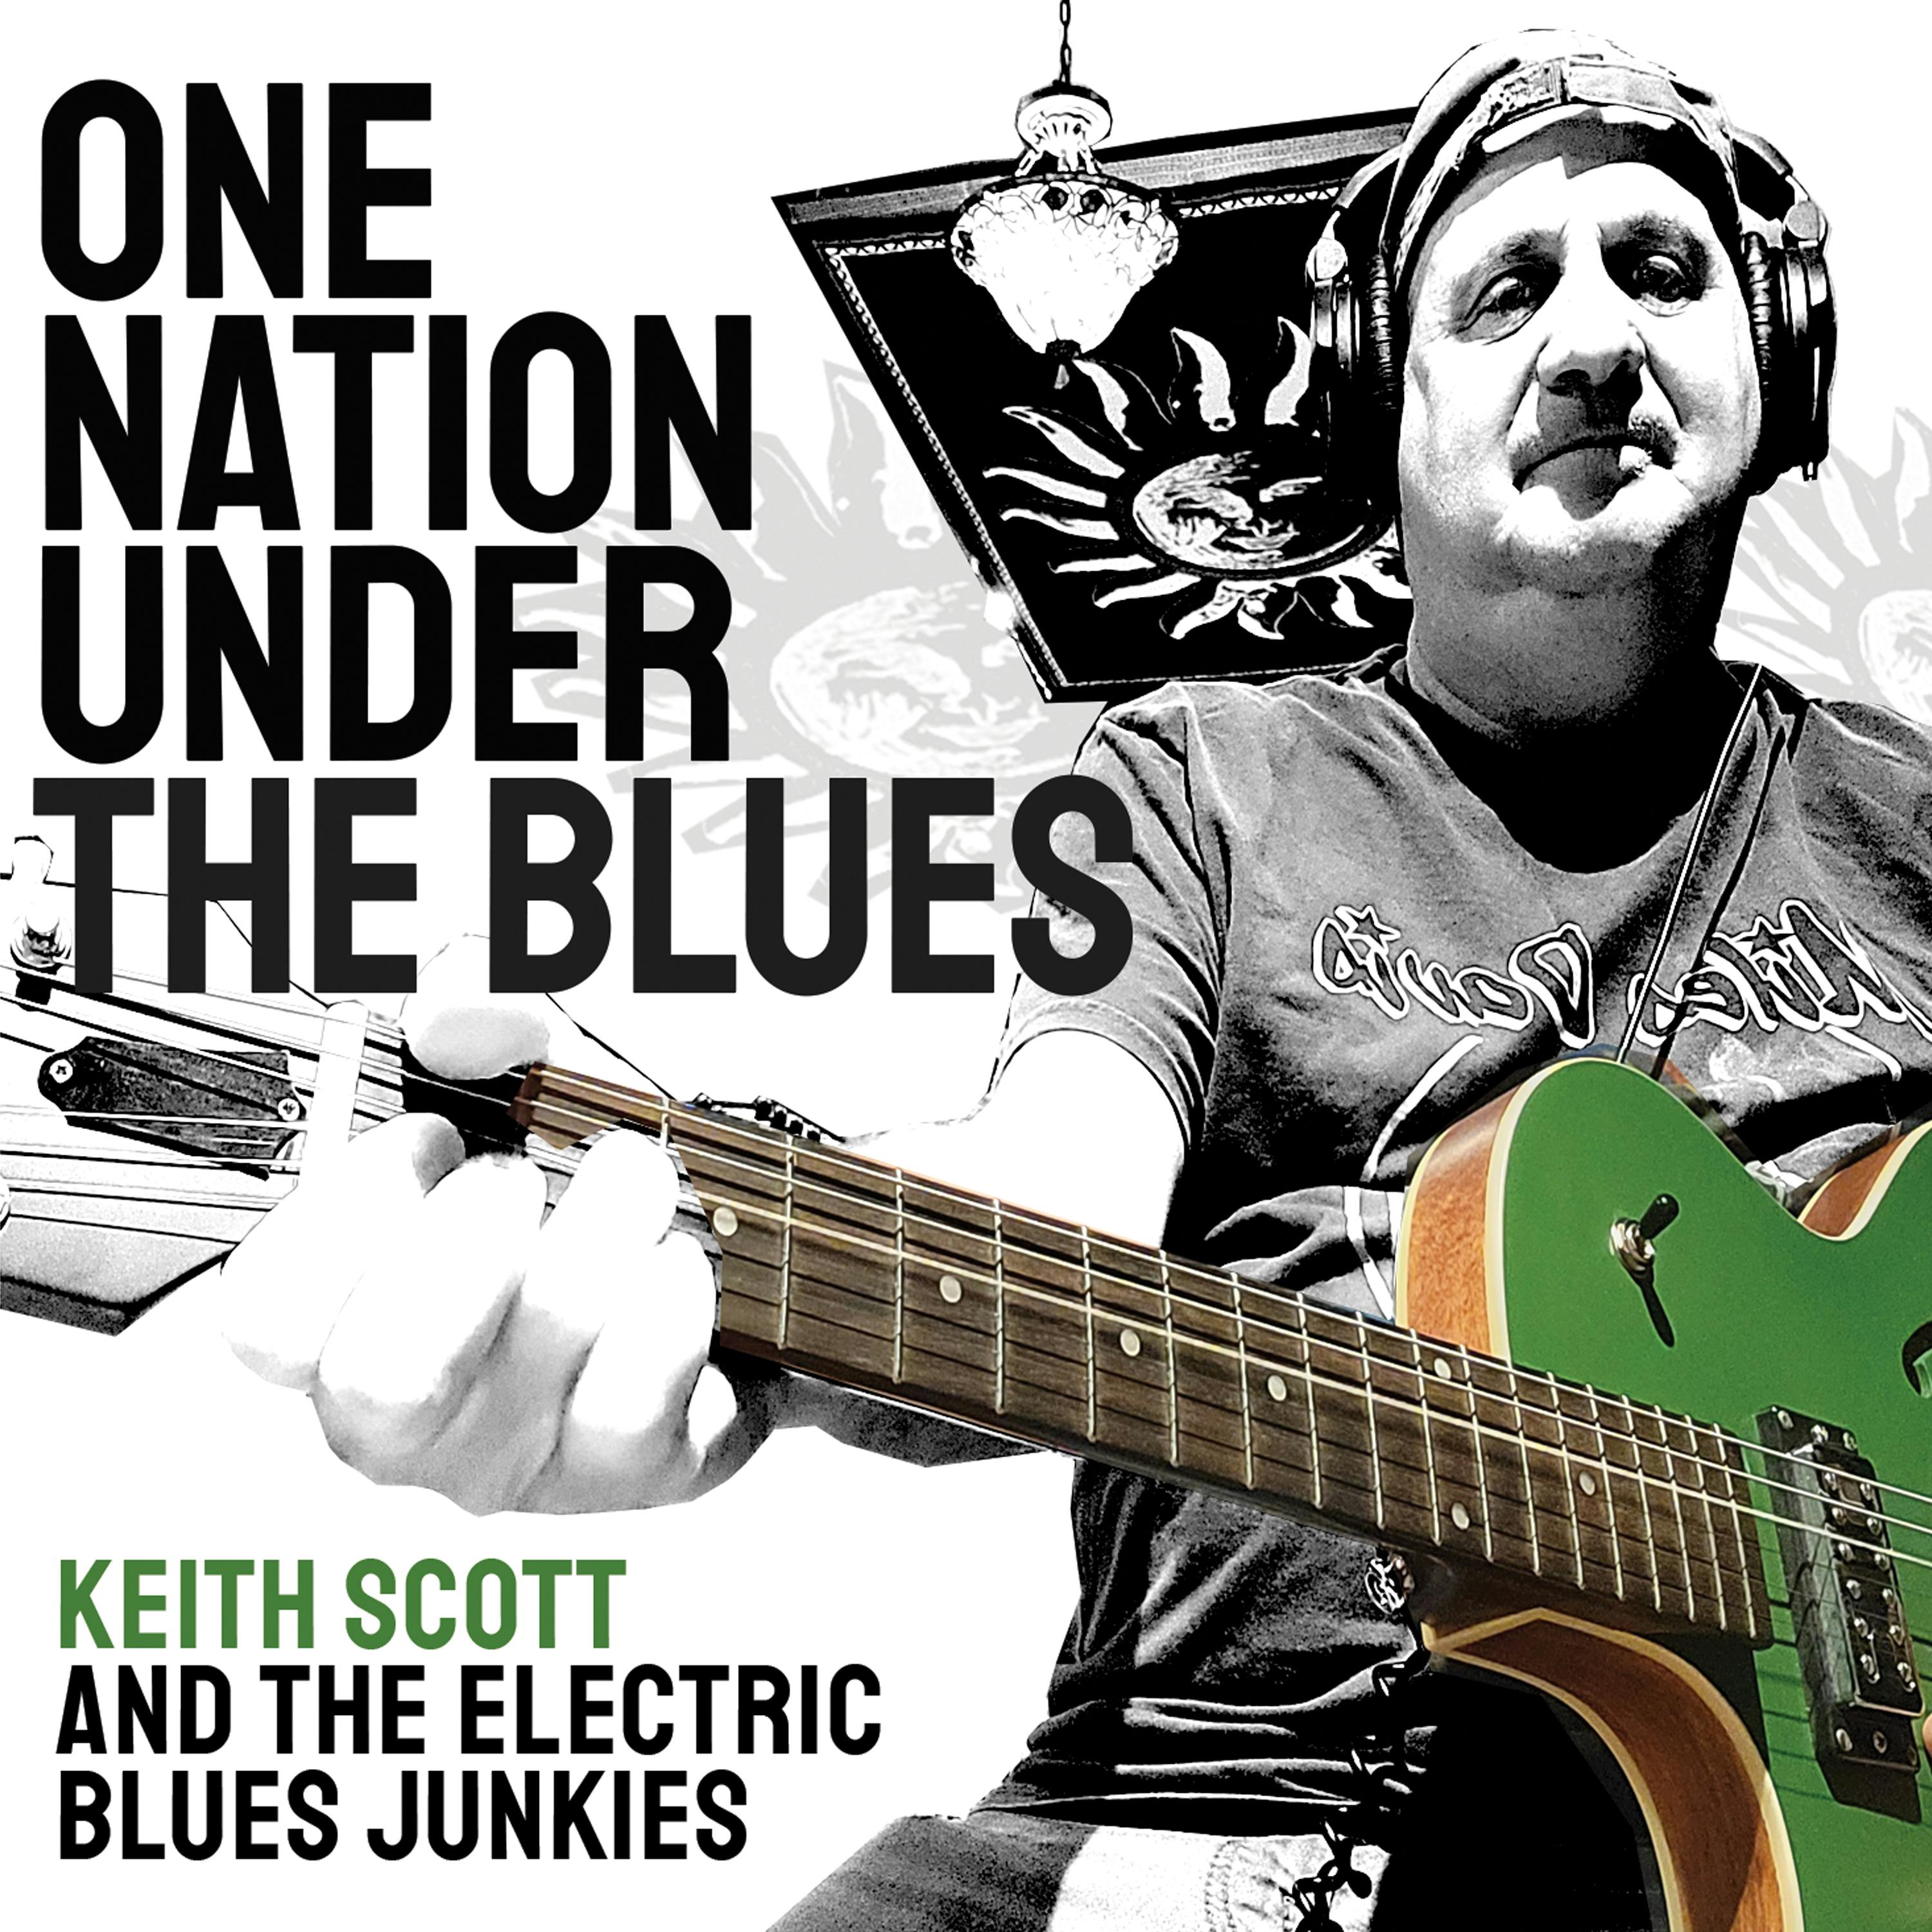 One Nation Under the Blues